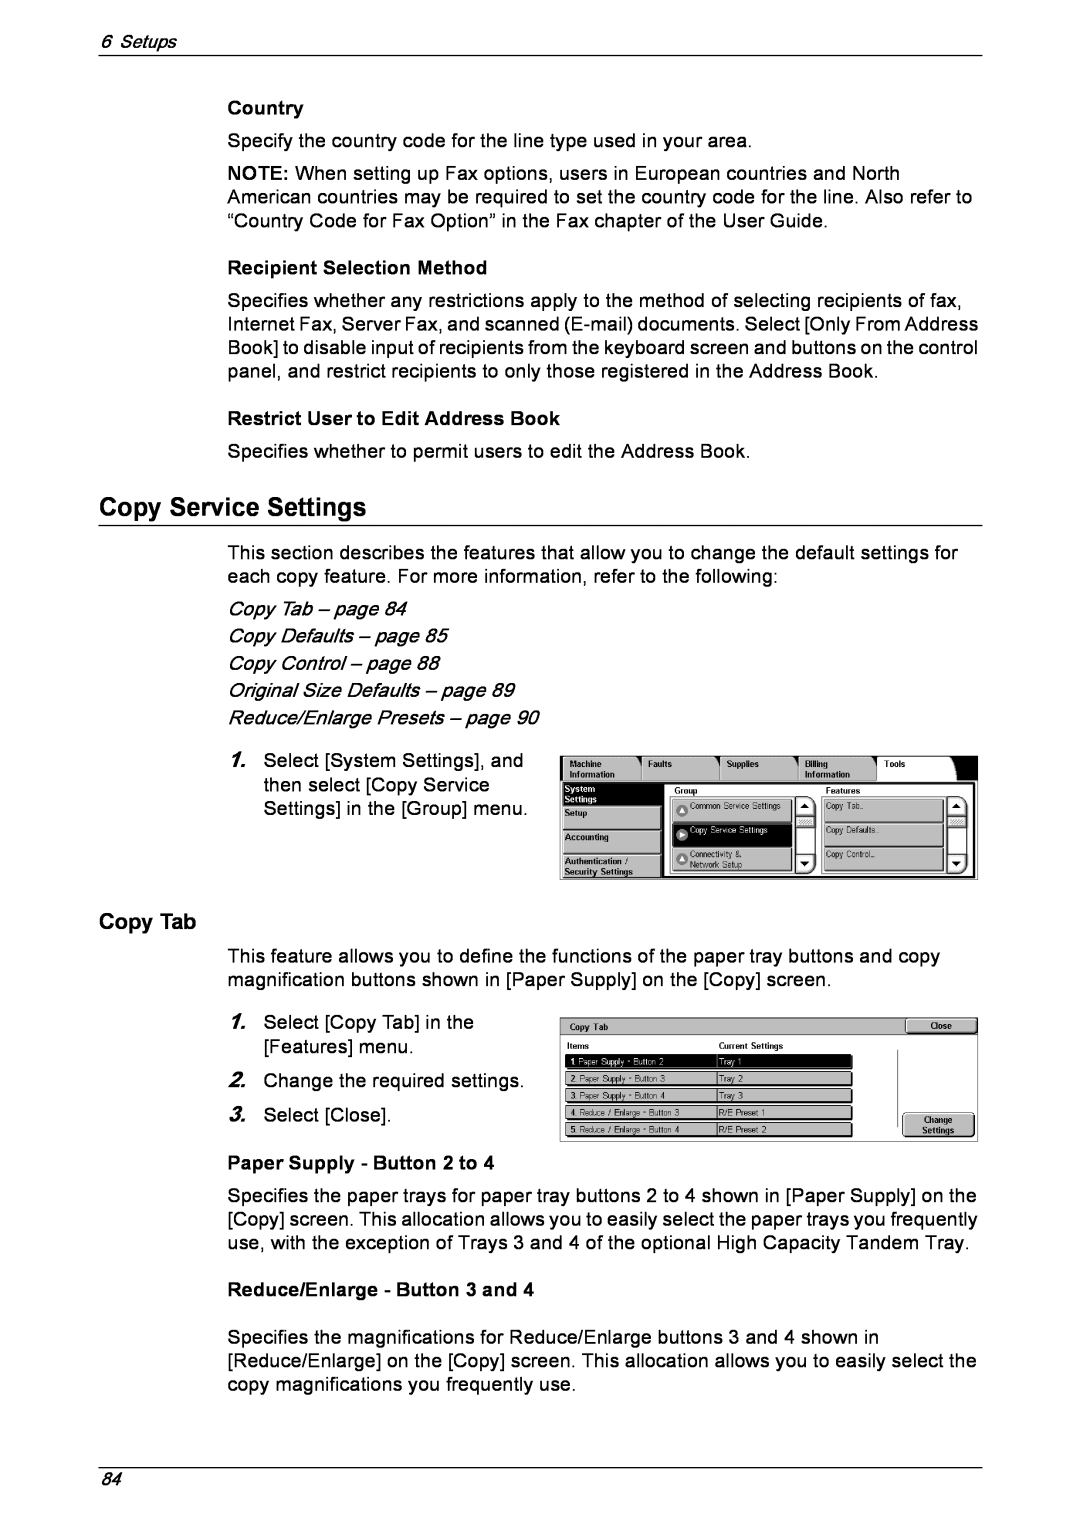 Xerox 5222 manual Copy Service Settings, Country, Recipient Selection Method, Restrict User to Edit Address Book 